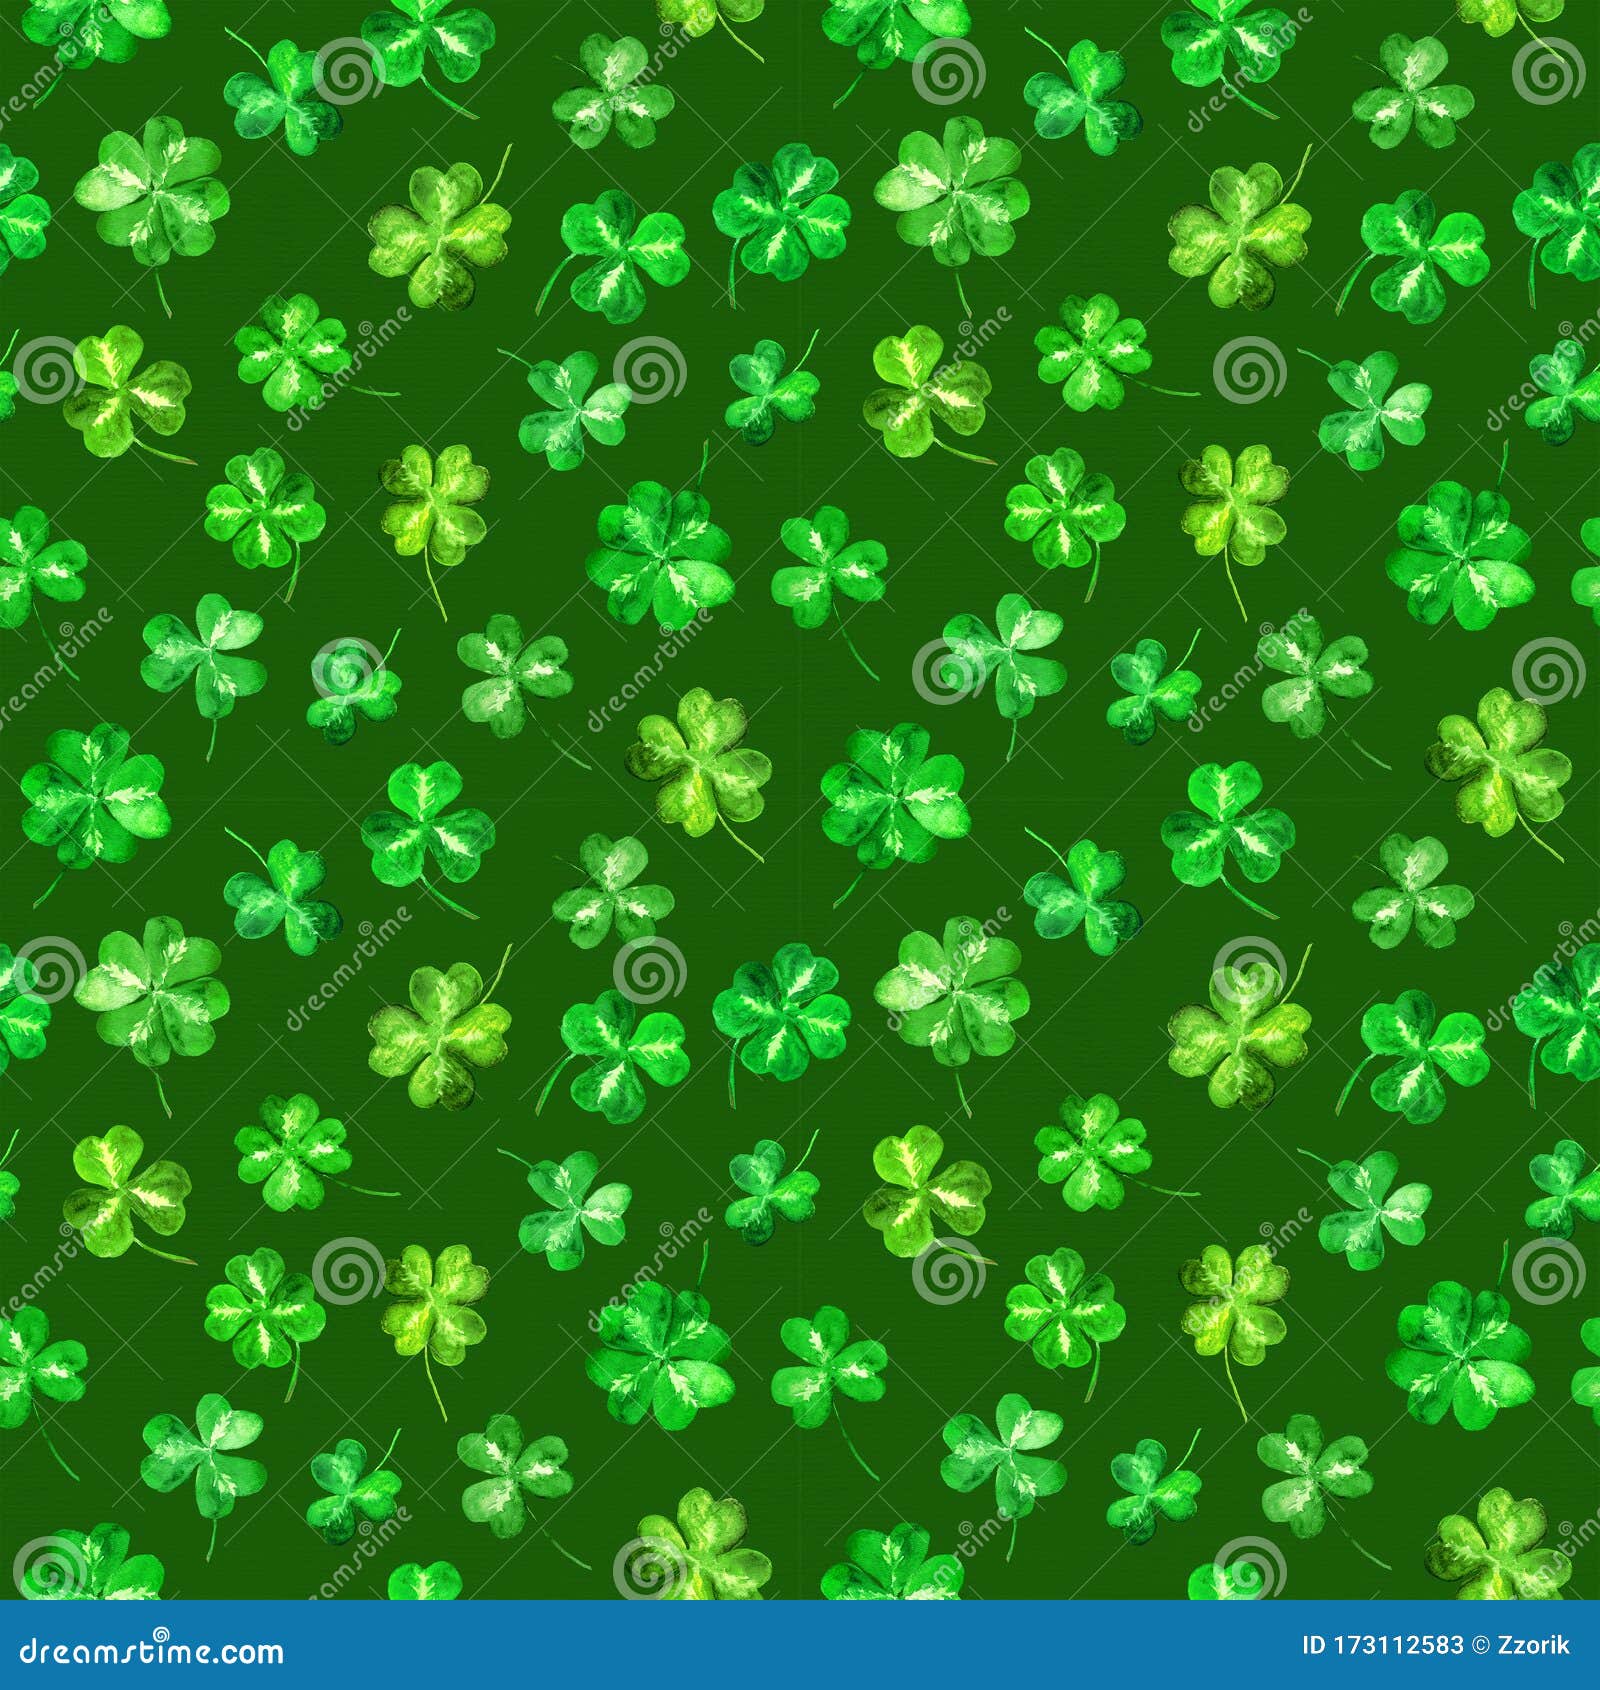 trefoil leaves, four leaf clover. repeating background. watercolor for saint patrick day